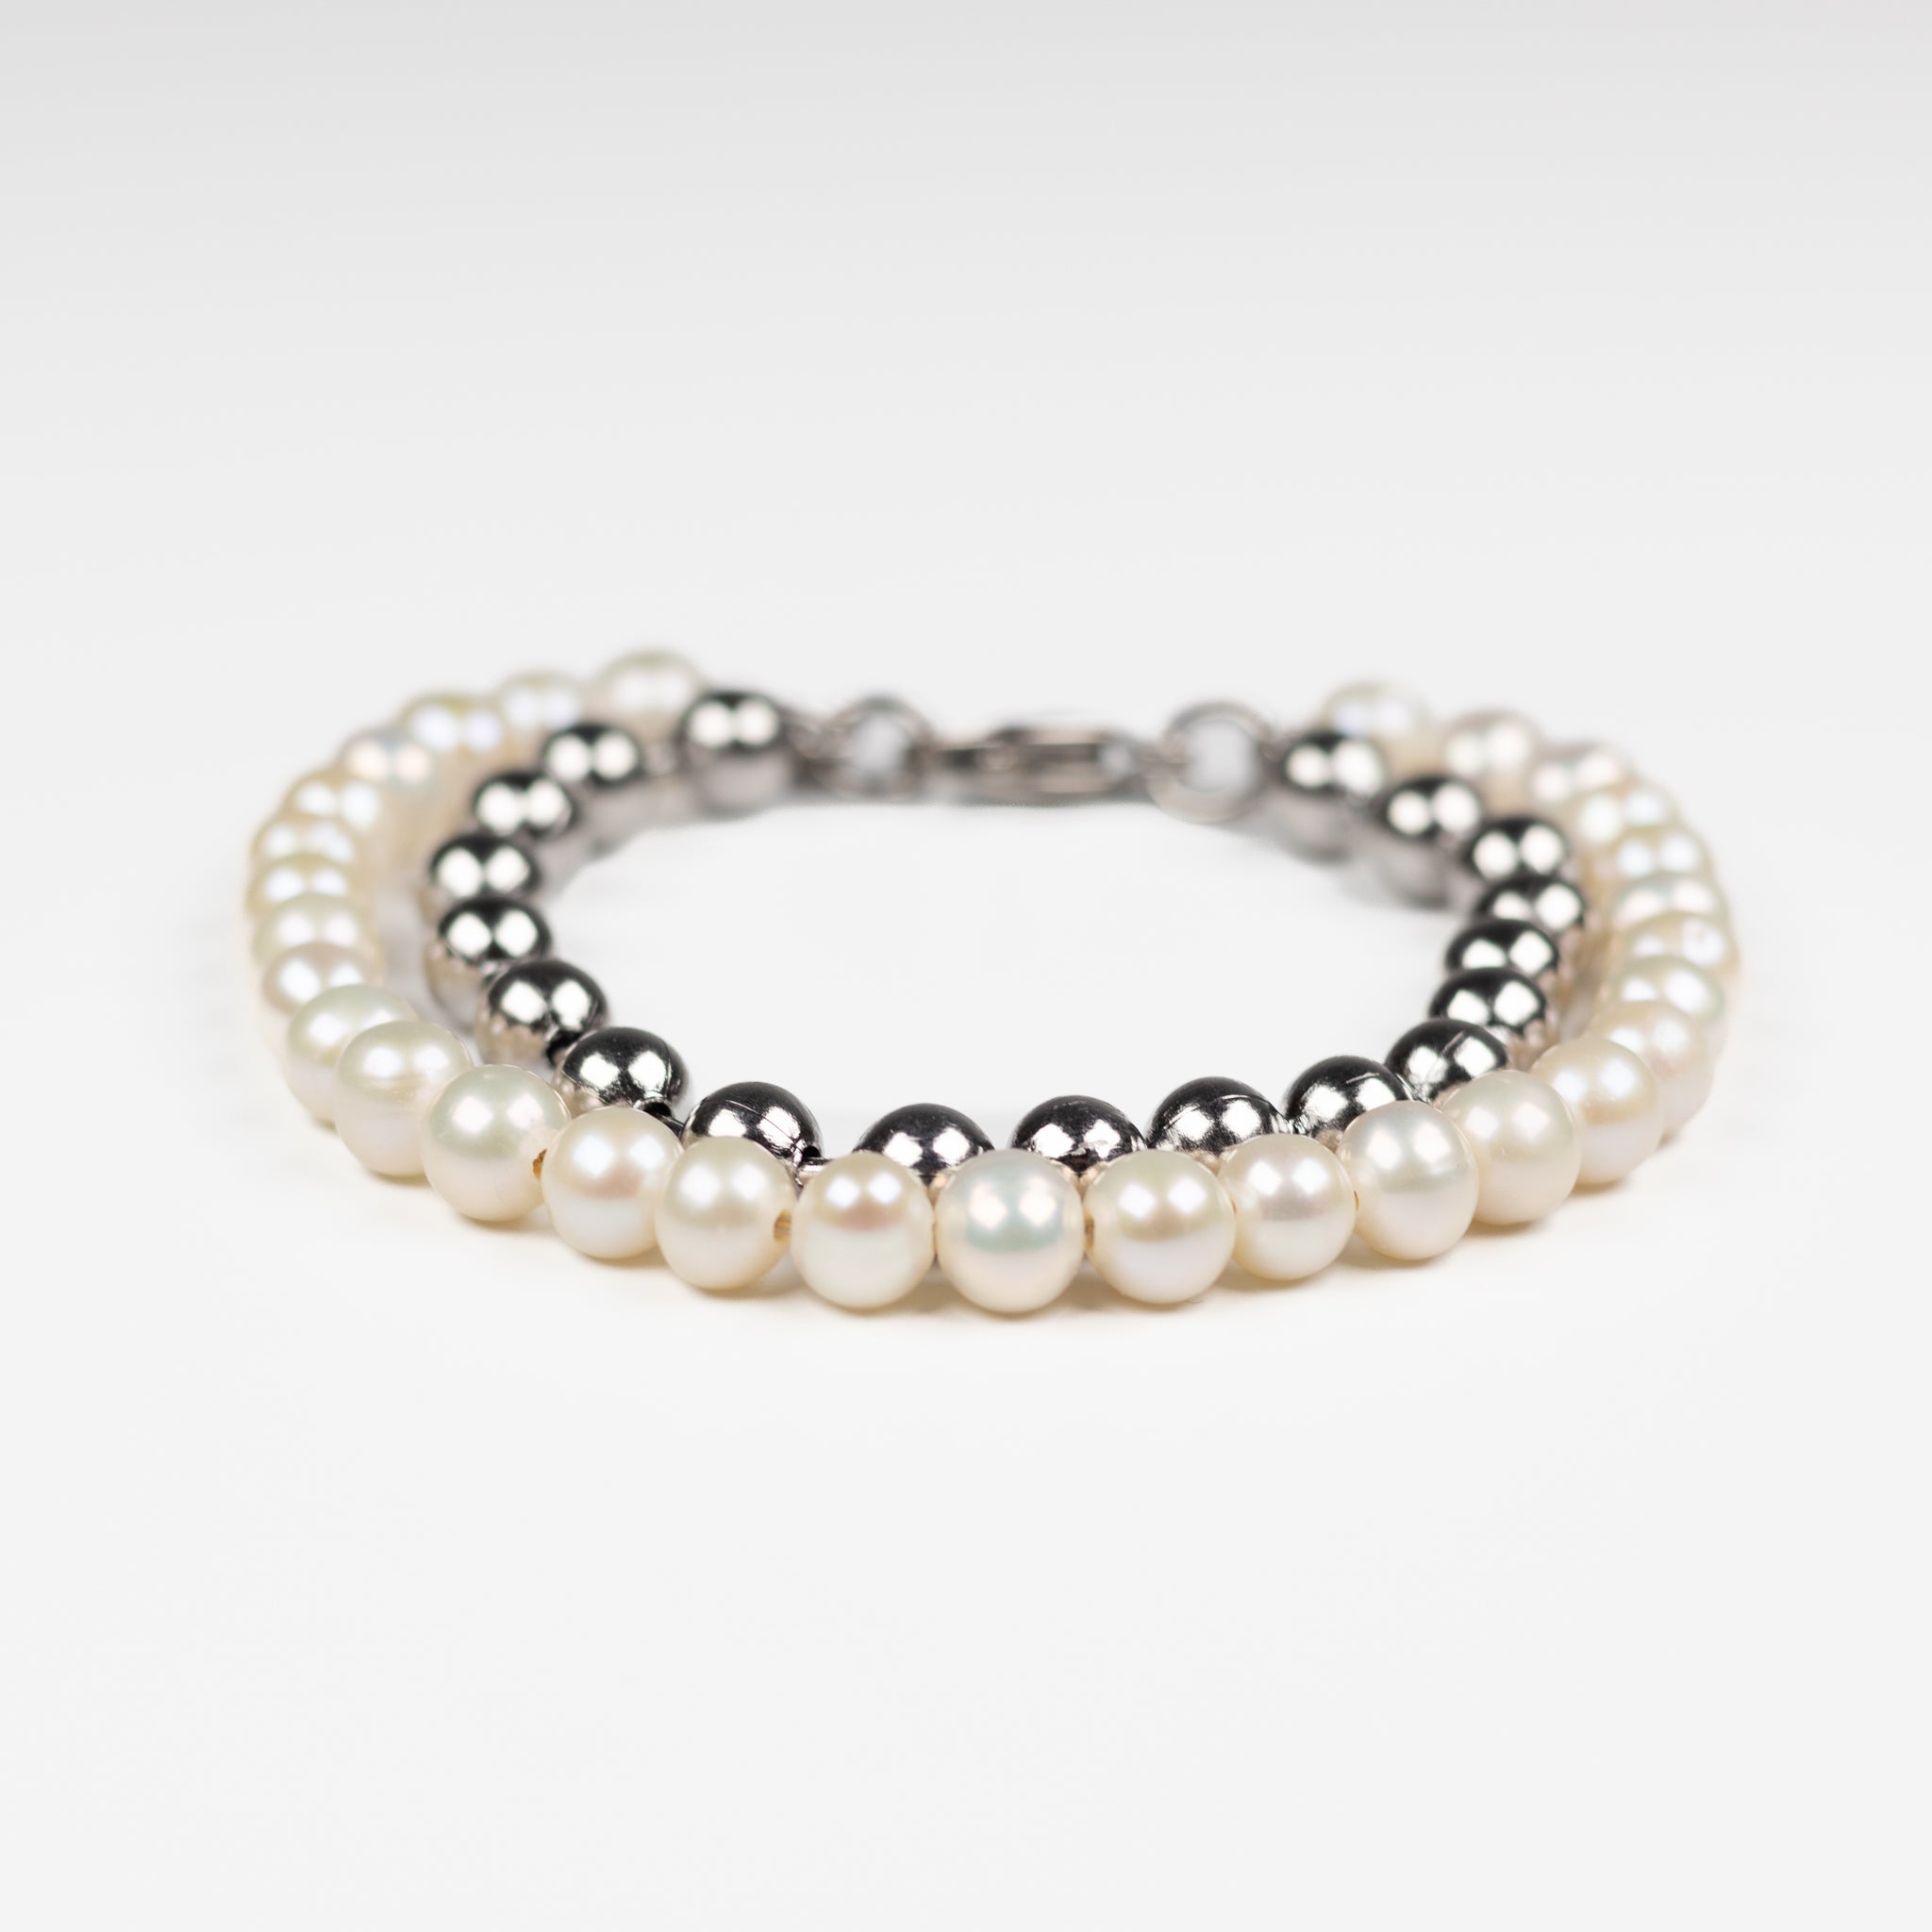 Stainless Steel and White Freshwater Pearl Double Ball Bracelet